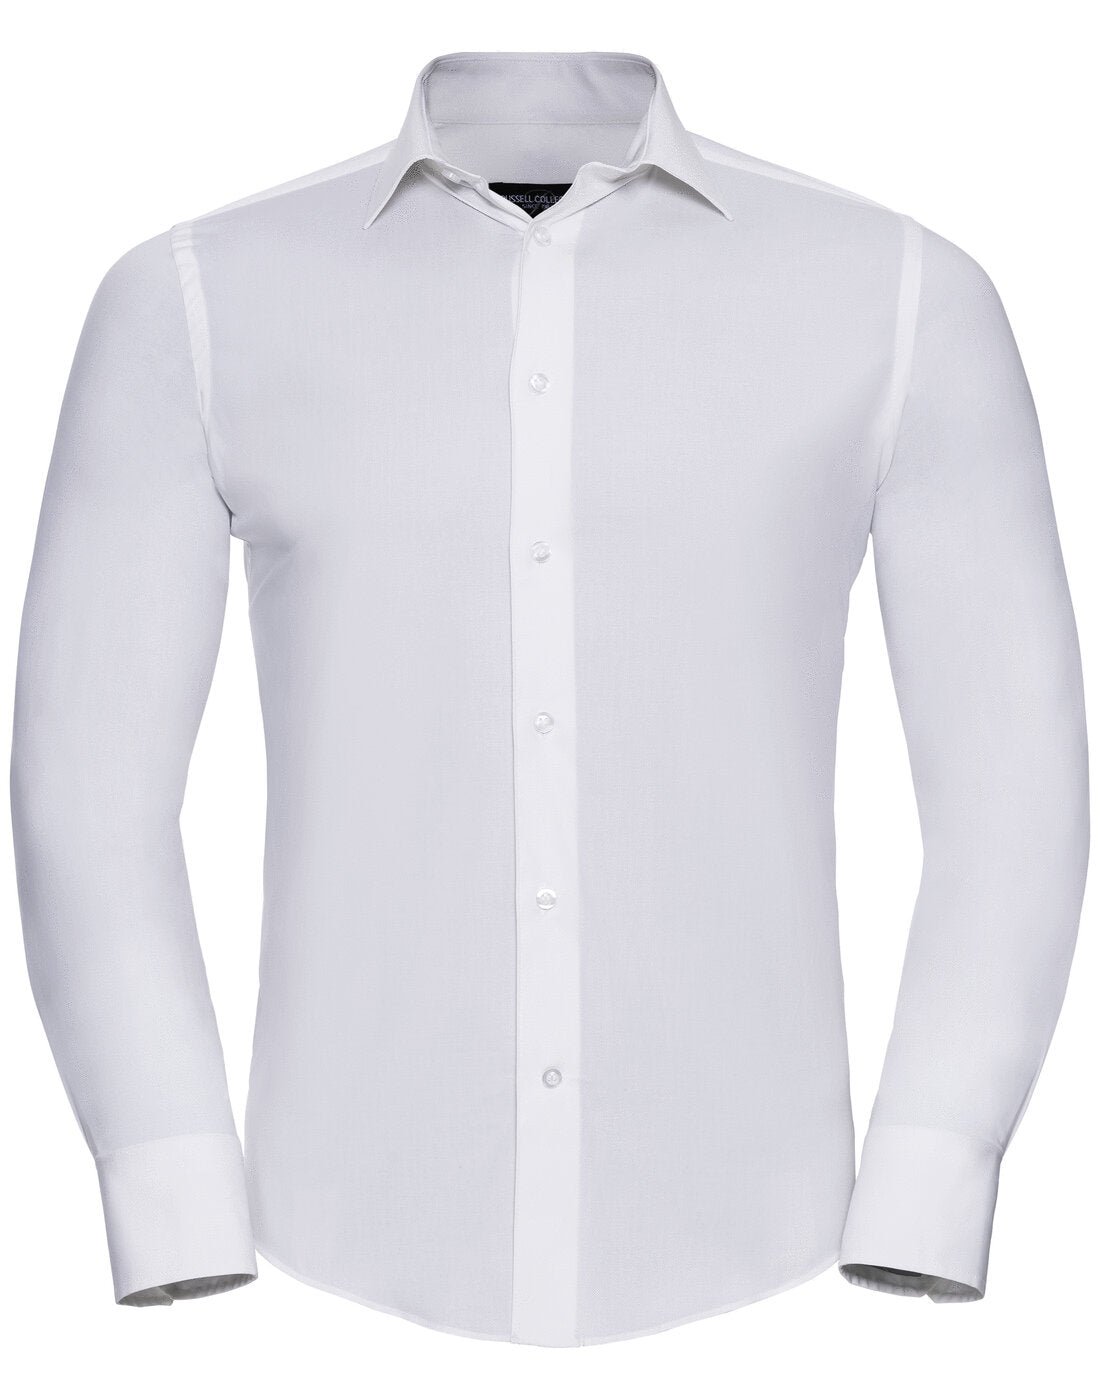 Russell Mens Long Sleeve Fitted Stretch Shirt White